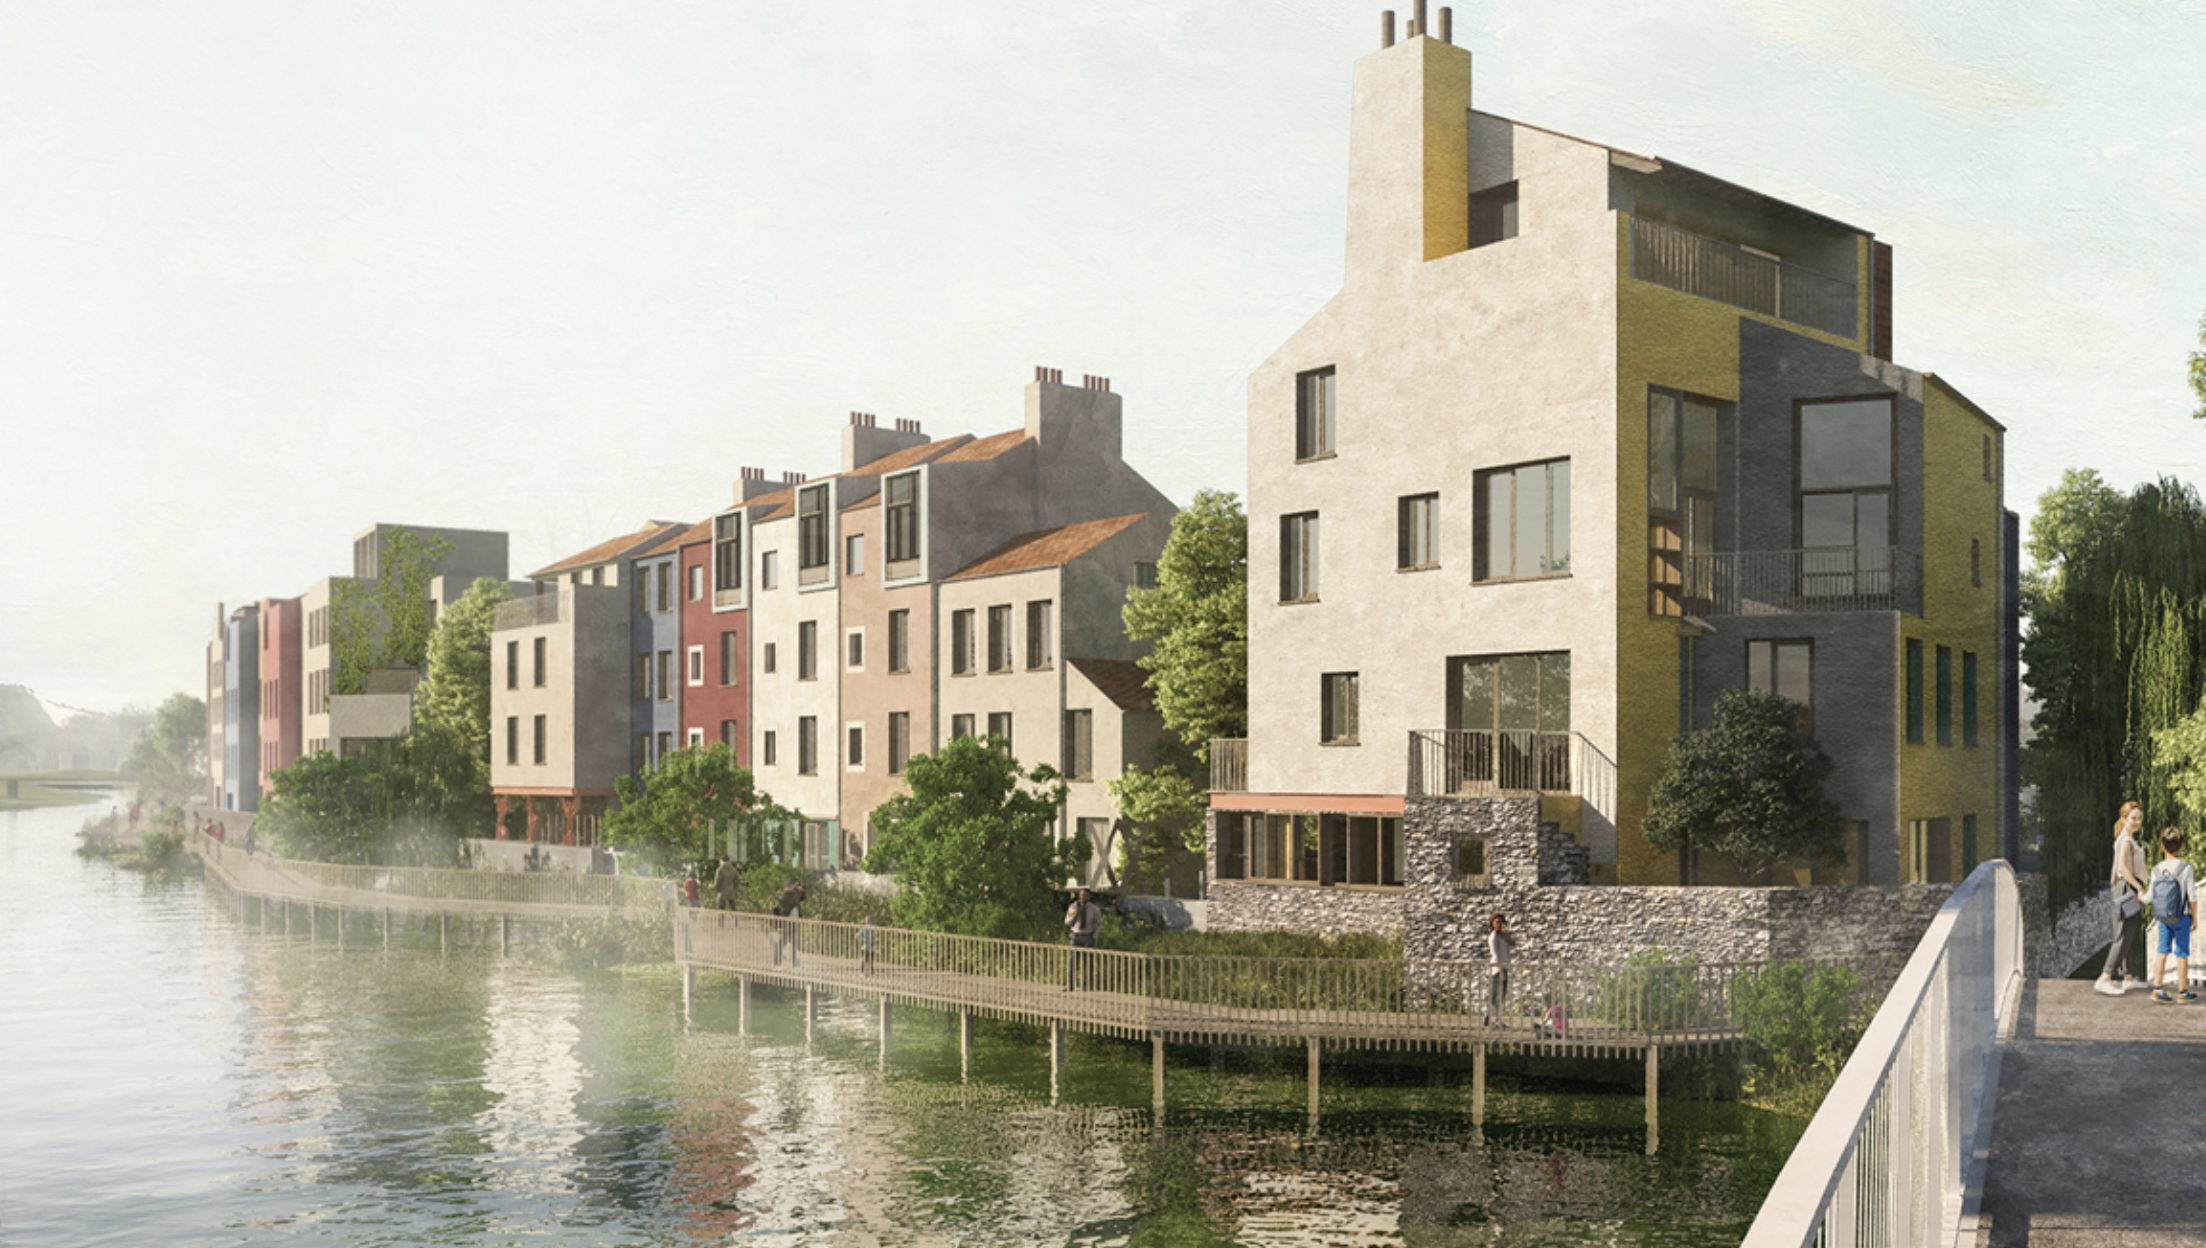 Go-ahead for UK’s largest timber-structure neighbourhood